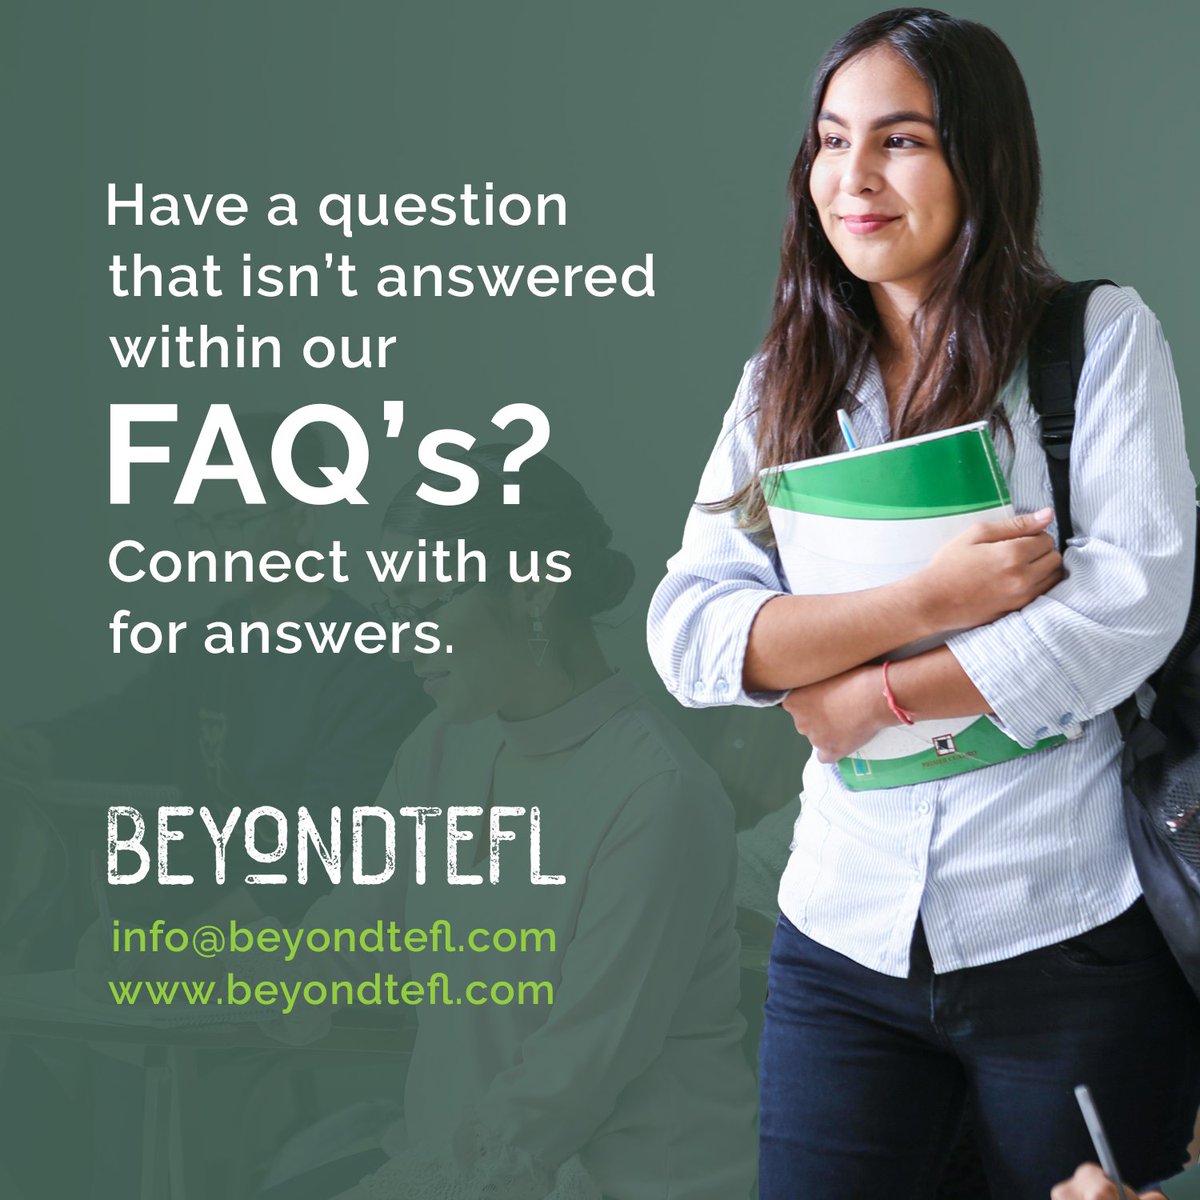 Got a question not covered in our FAQs? Reach out to us here for the answers you need: beyondtefl.com/contact-us/ #BeyondTEFL #FAQ #CustomerService #GetInTouch #TeachAbroad #TEFLCertification #TeachEnglishAbroad